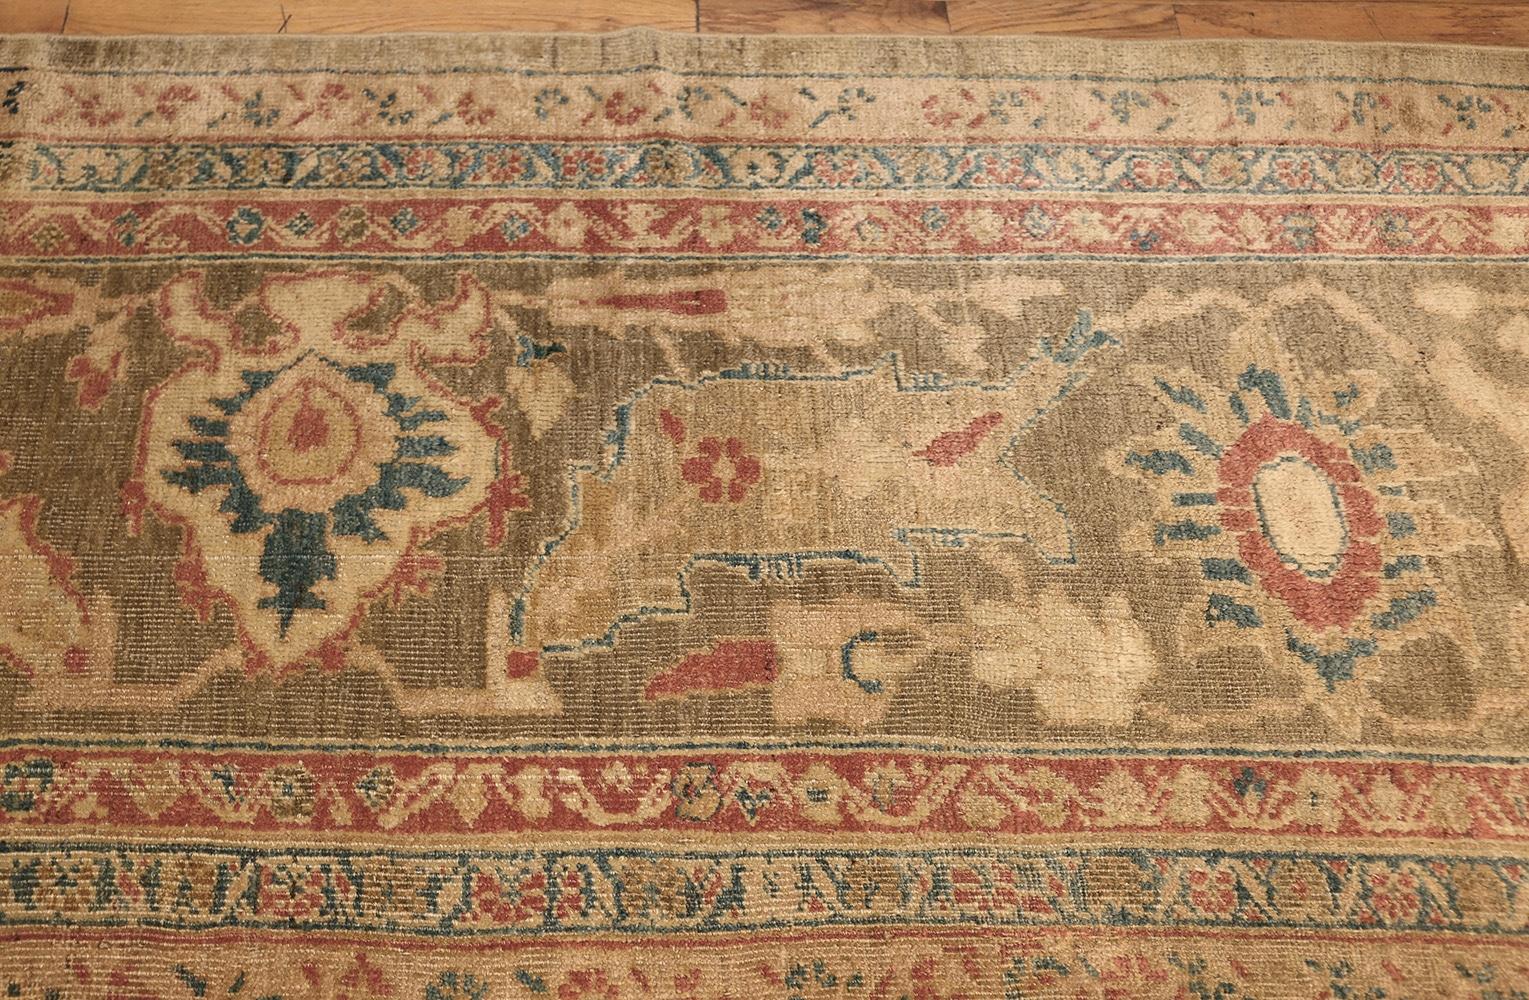 Decorative Antique Persian Sultanabad Rug, Country of Origin: Persia, Circa date: 1900. Size: 13 ft 8 in x 16 ft 2 in (4.17 m x 4.93 m)

